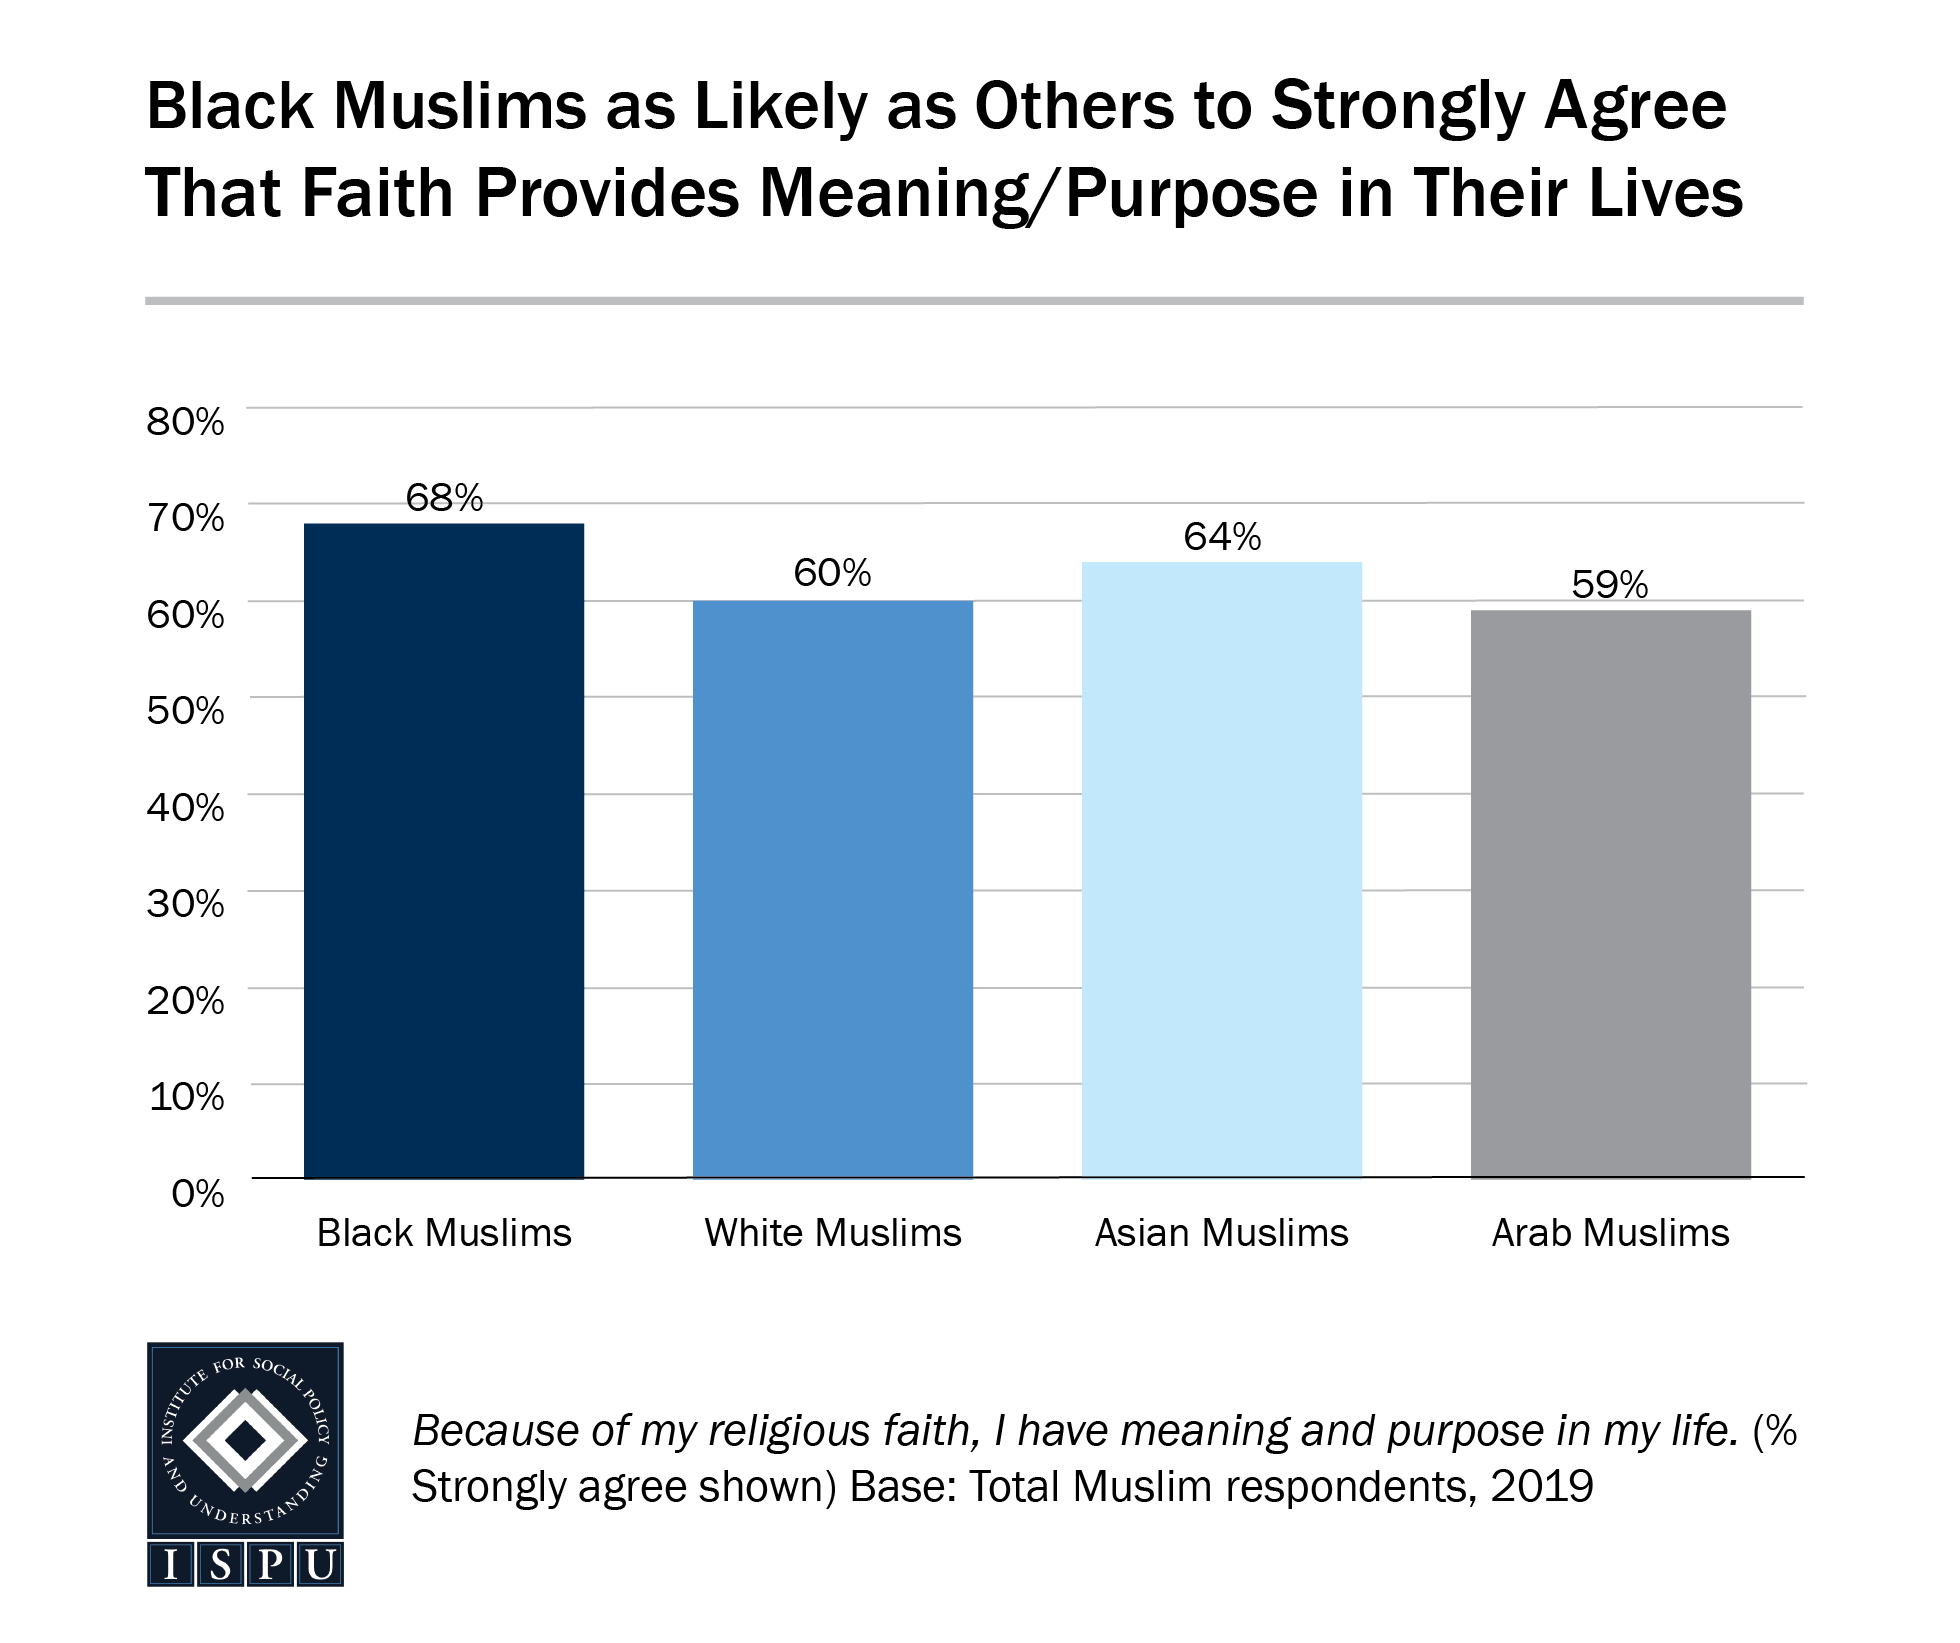 A bar graph showing that Black Muslims are as likely as others to strongly agree that faith provides meaning/purpose in their lives